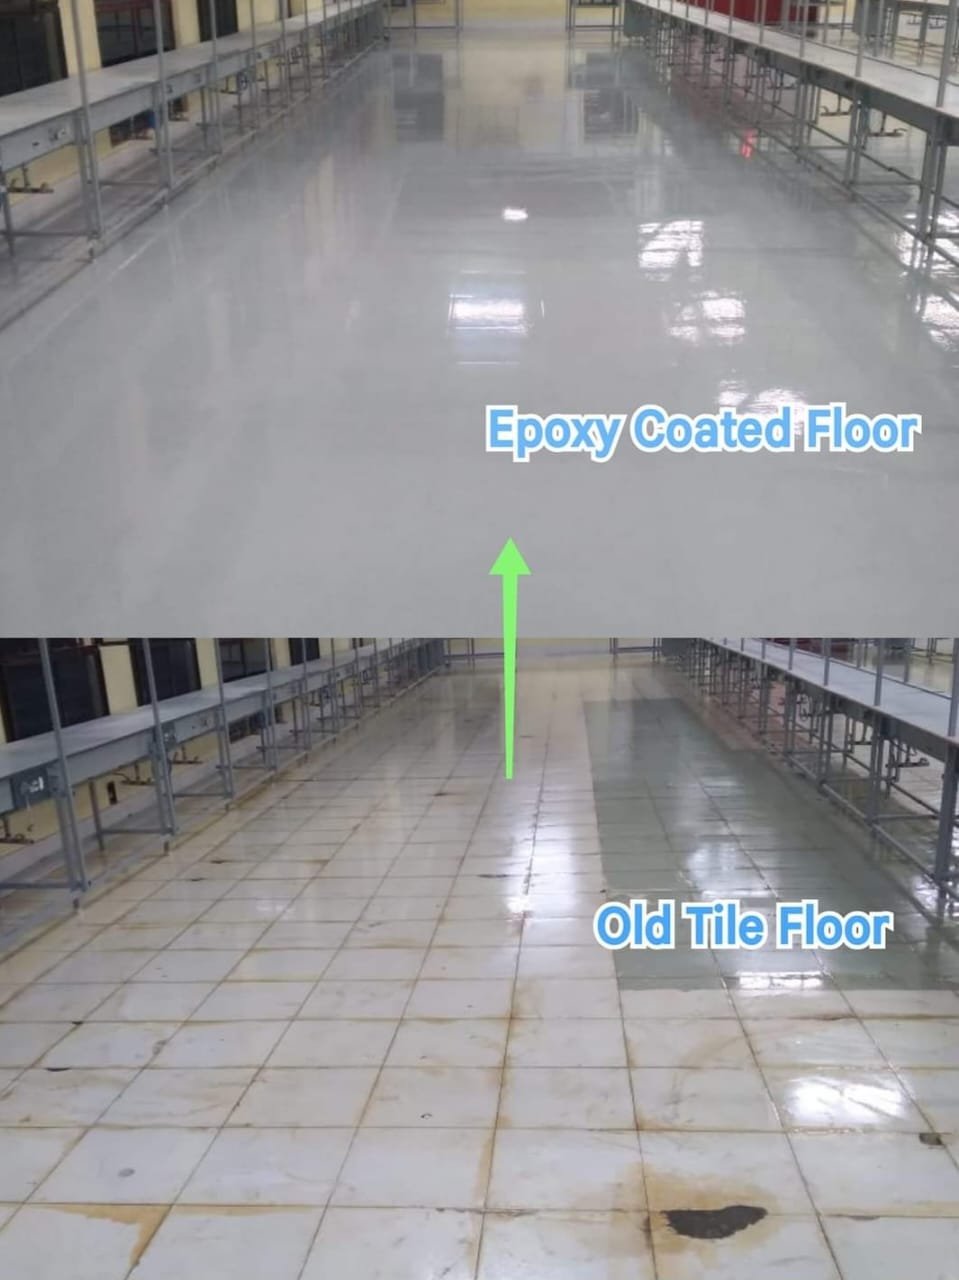 CAN EPOXY FLOORING BE DONE ON TILES